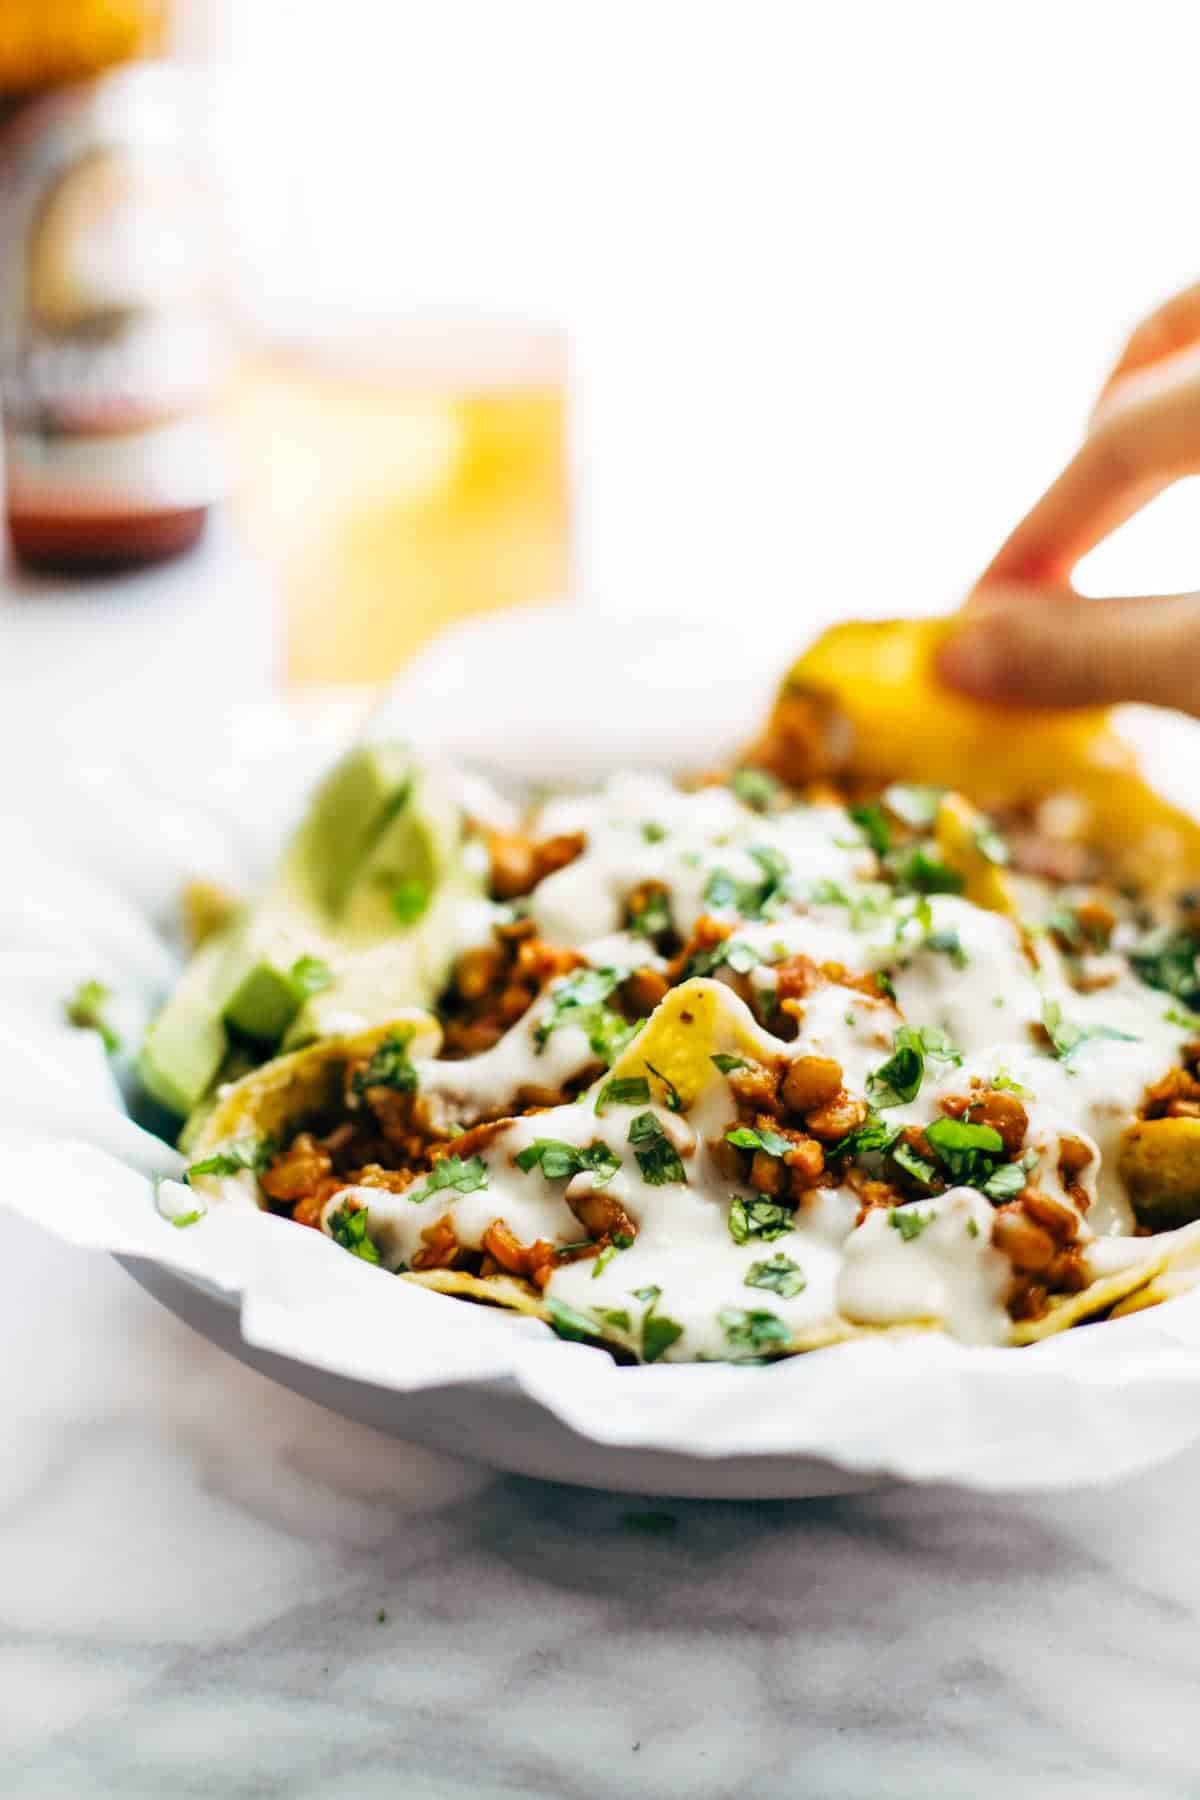 Spicy Lentil Nachos with Three Cheese Sauce - you will not believe how good these are! Saucy filling with a velvety homemade cheese sauce. Vegetarian. | pinchofyum.com